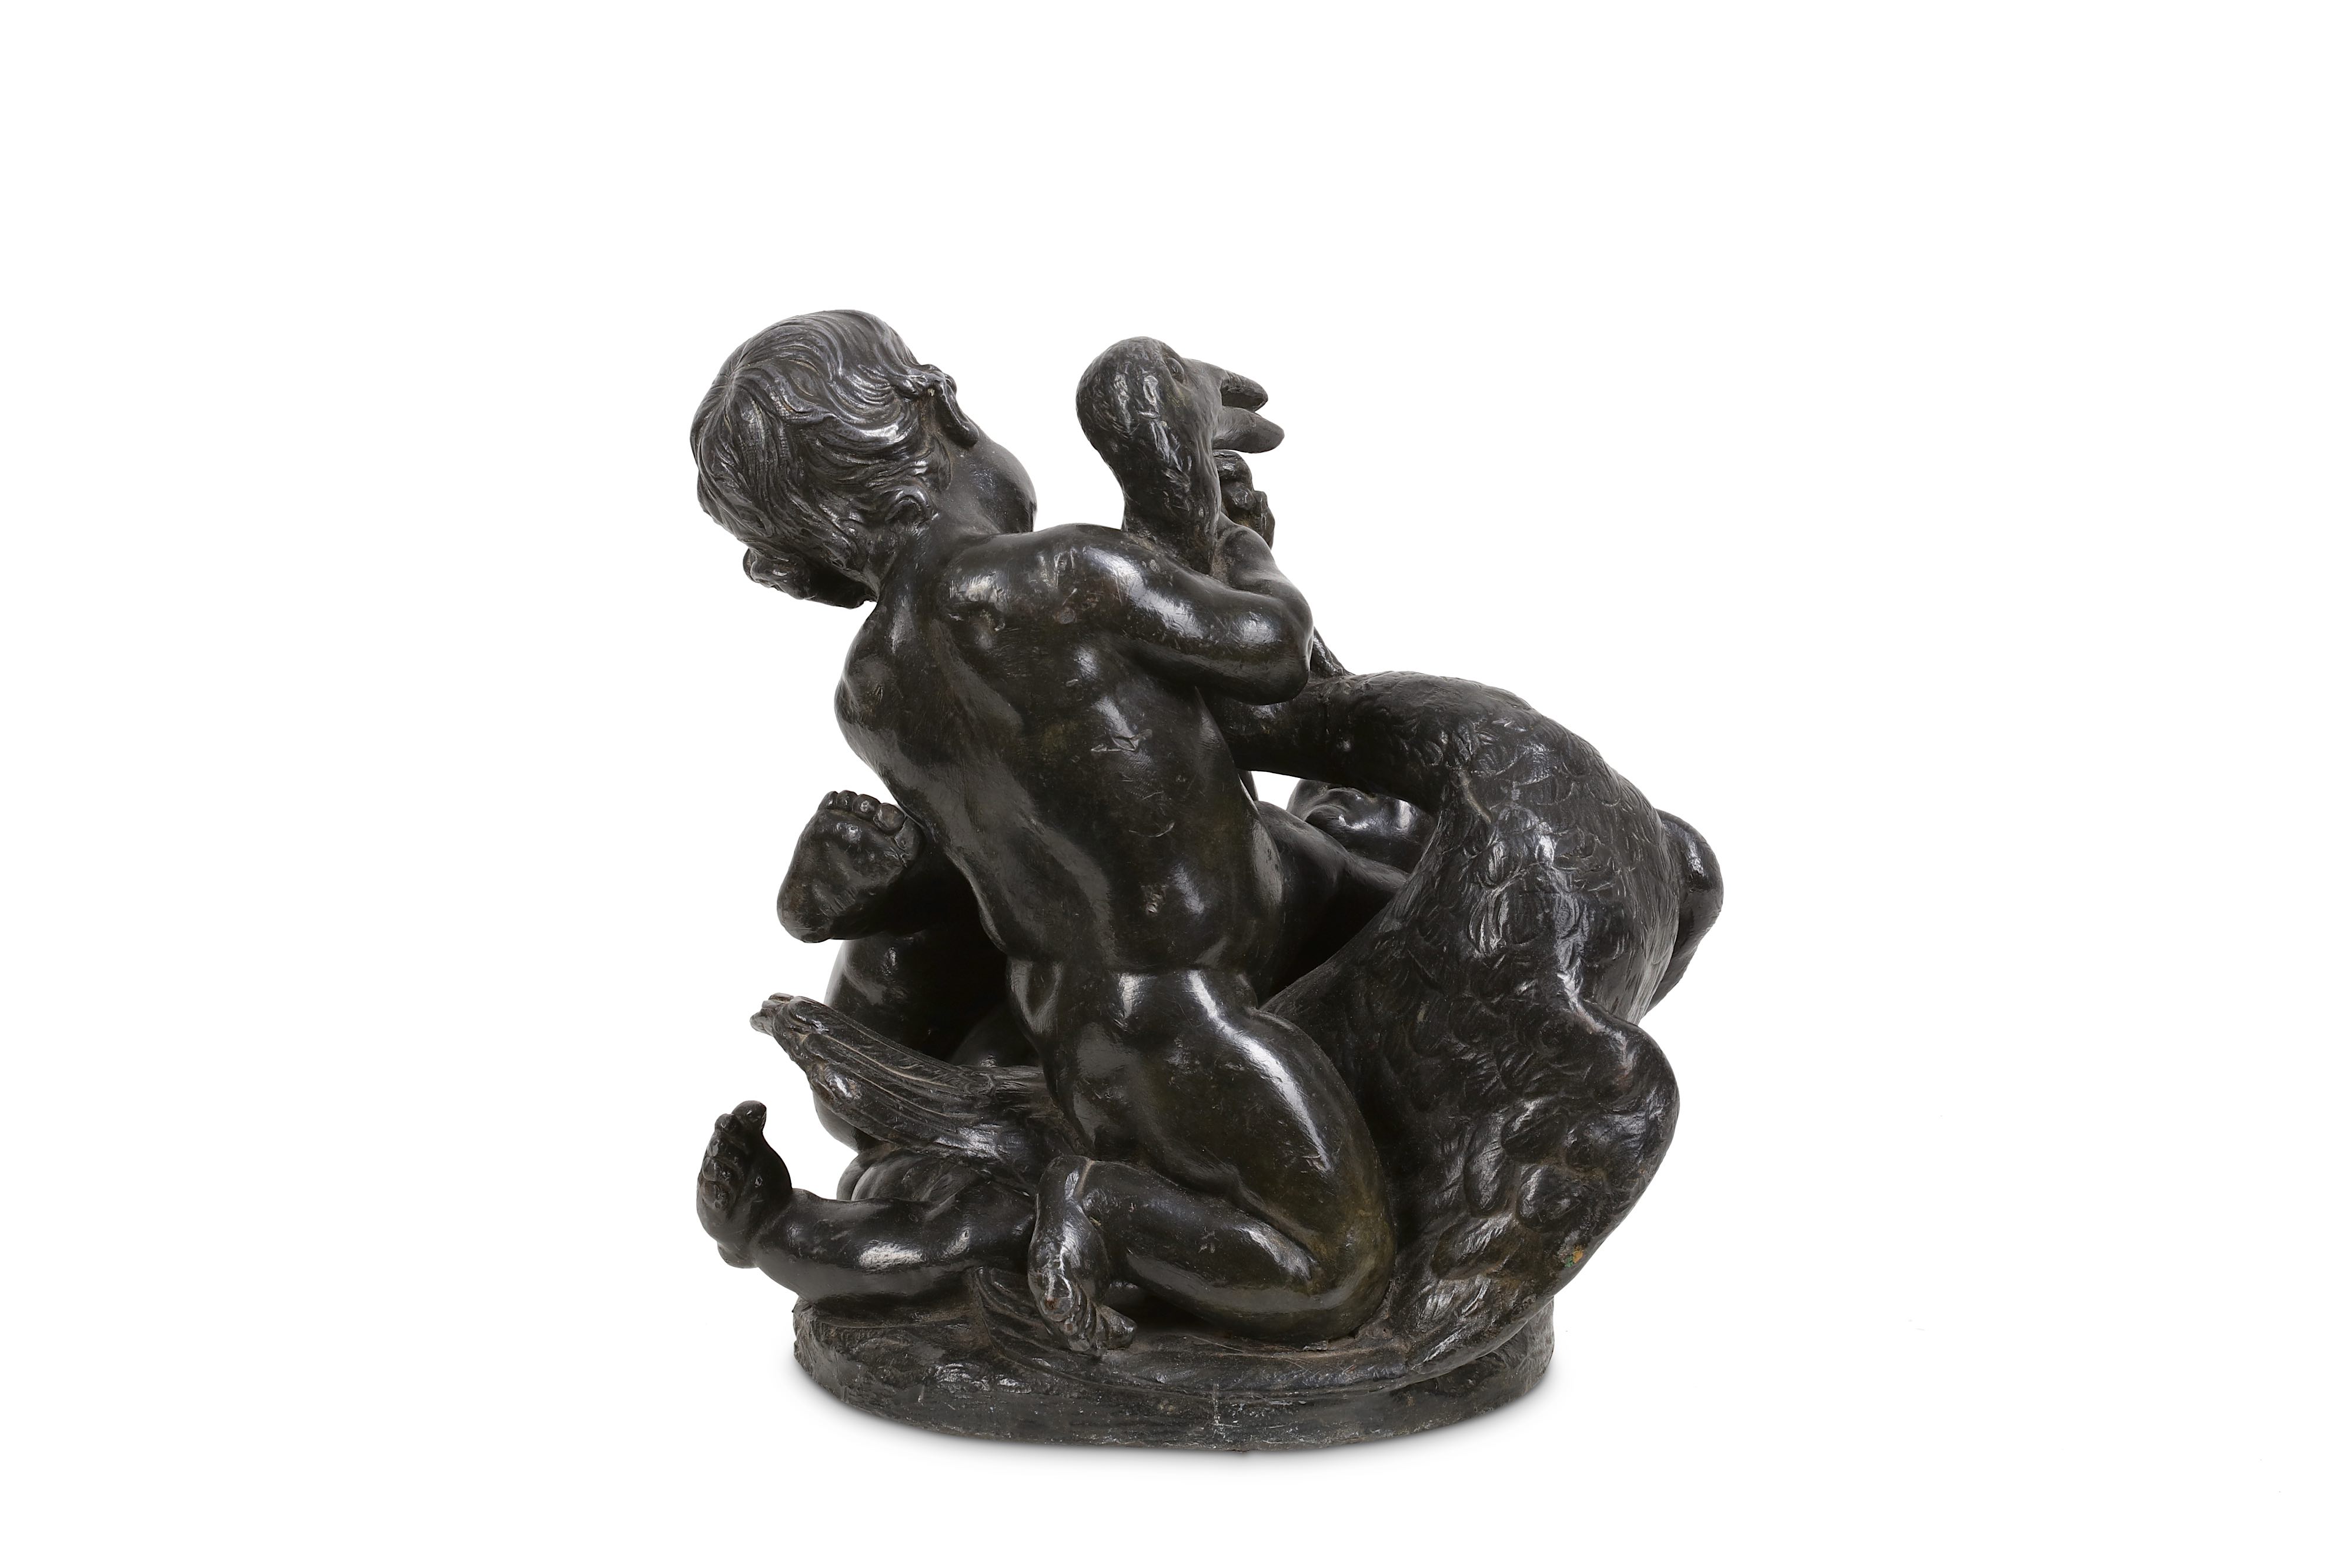 AN 18TH CENTURY FRENCH LEAD MODEL OF TWO PUTTI PLAYING WITH A GOOSE - Image 2 of 4